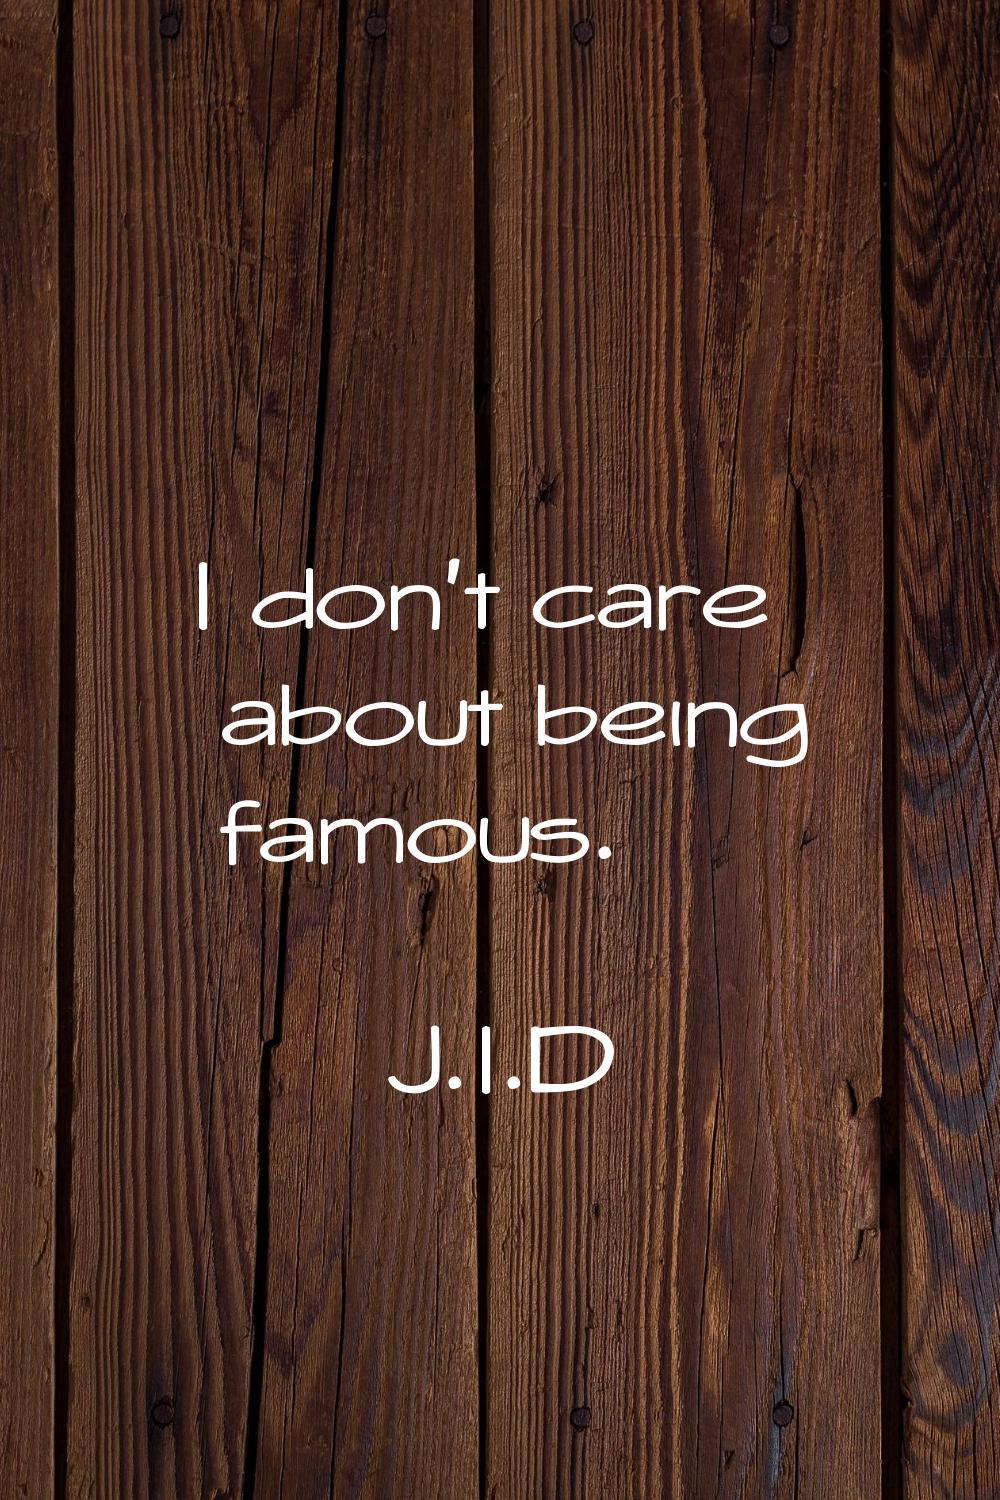 I don't care about being famous.